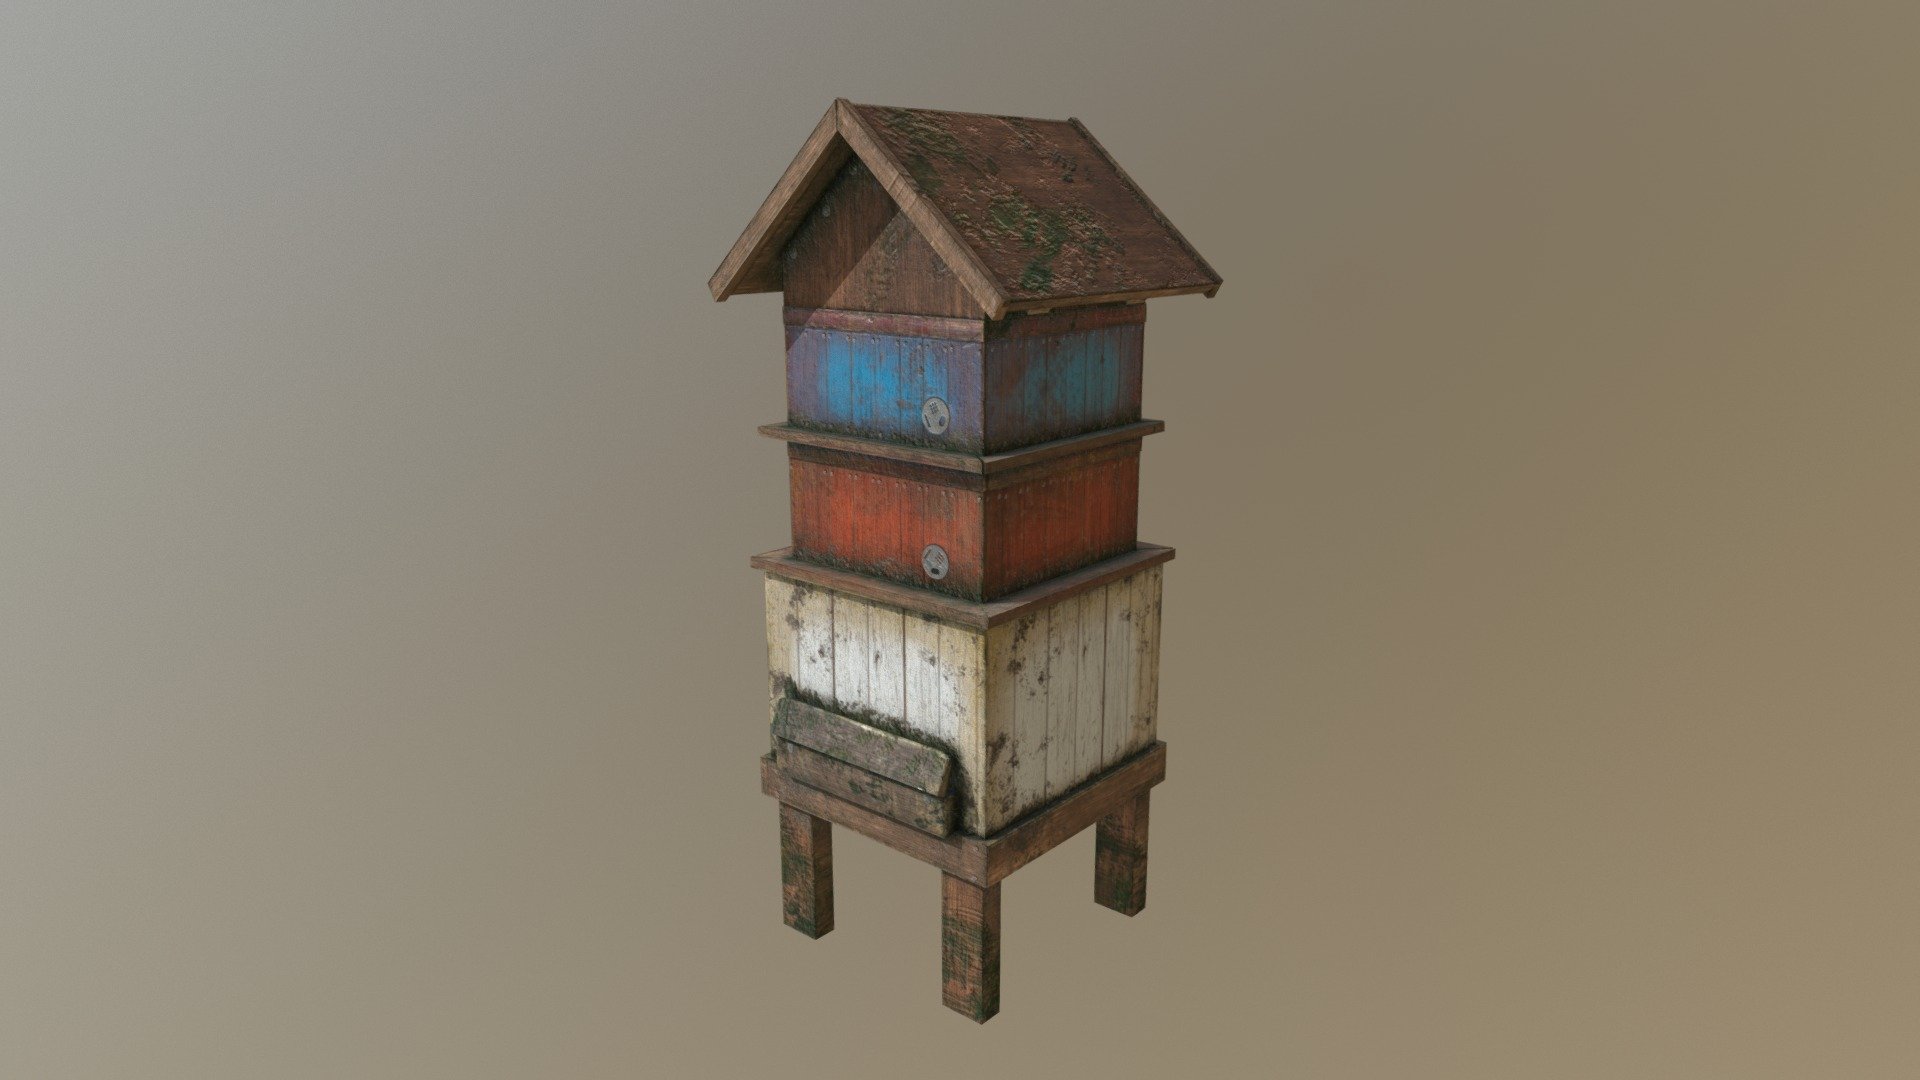 Blender and Substance Painter

https://www.behance.net/gallery/76139331/Illustrations-3D-Models-for-Beekeepers-Odyssey-VRAR - LOW POLY Rustic Bee Hive - Buy Royalty Free 3D model by Anežka Hájková (@anezka) 3d model